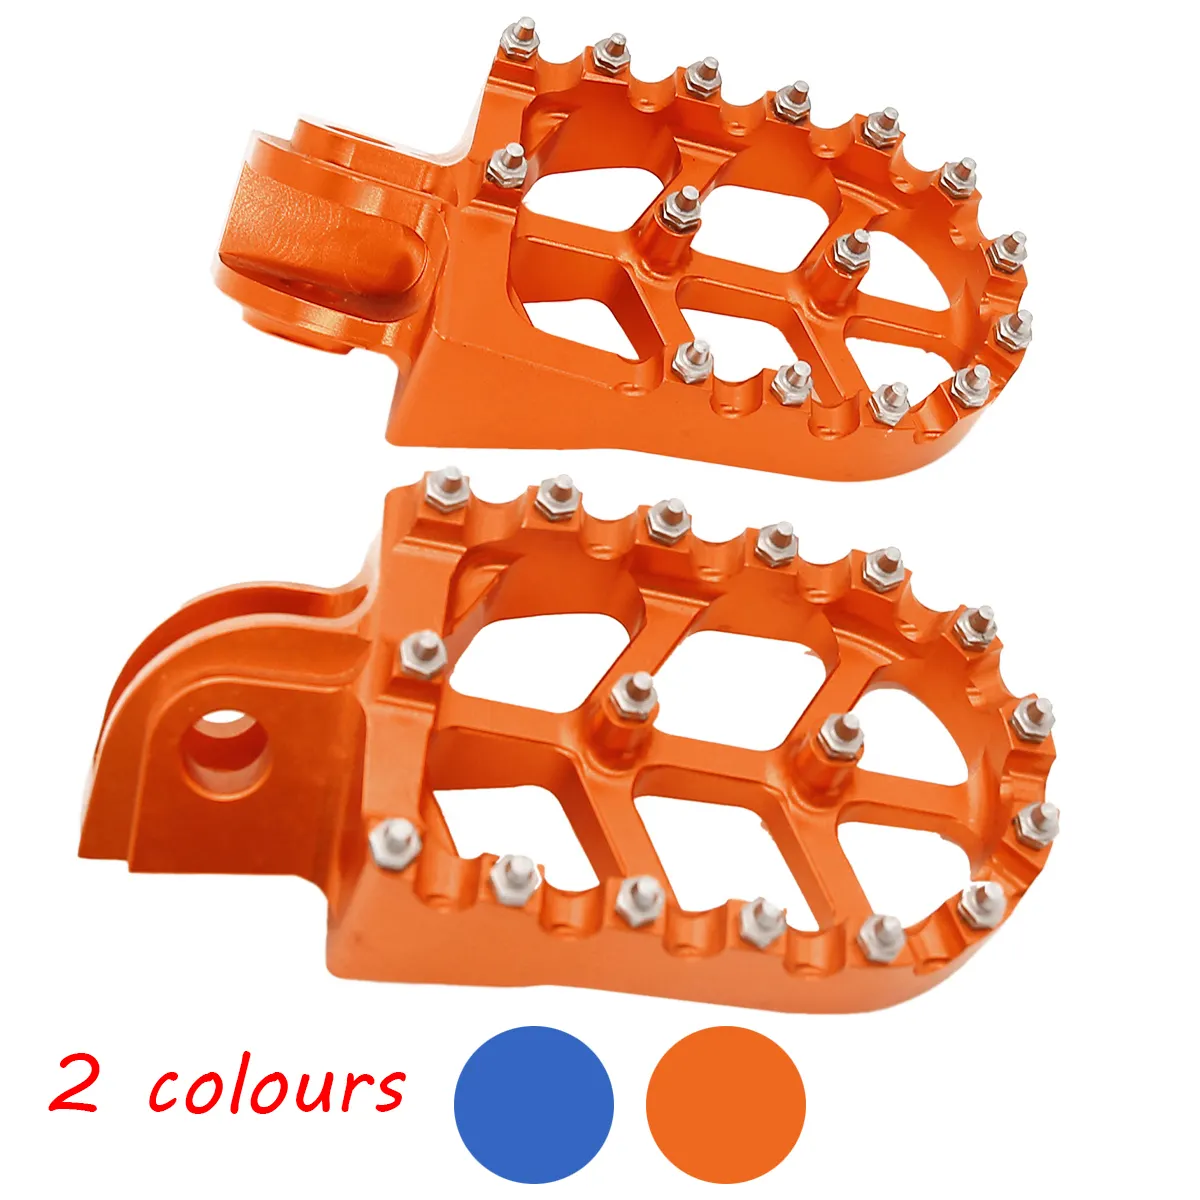 Motorcycle Foot Pegs Pedals Rests Footpeg For KTM SX SXS SXF XC XCW XCF EXC EXCF SMR 65 85 125 150 250 350 450 525 530 ADV